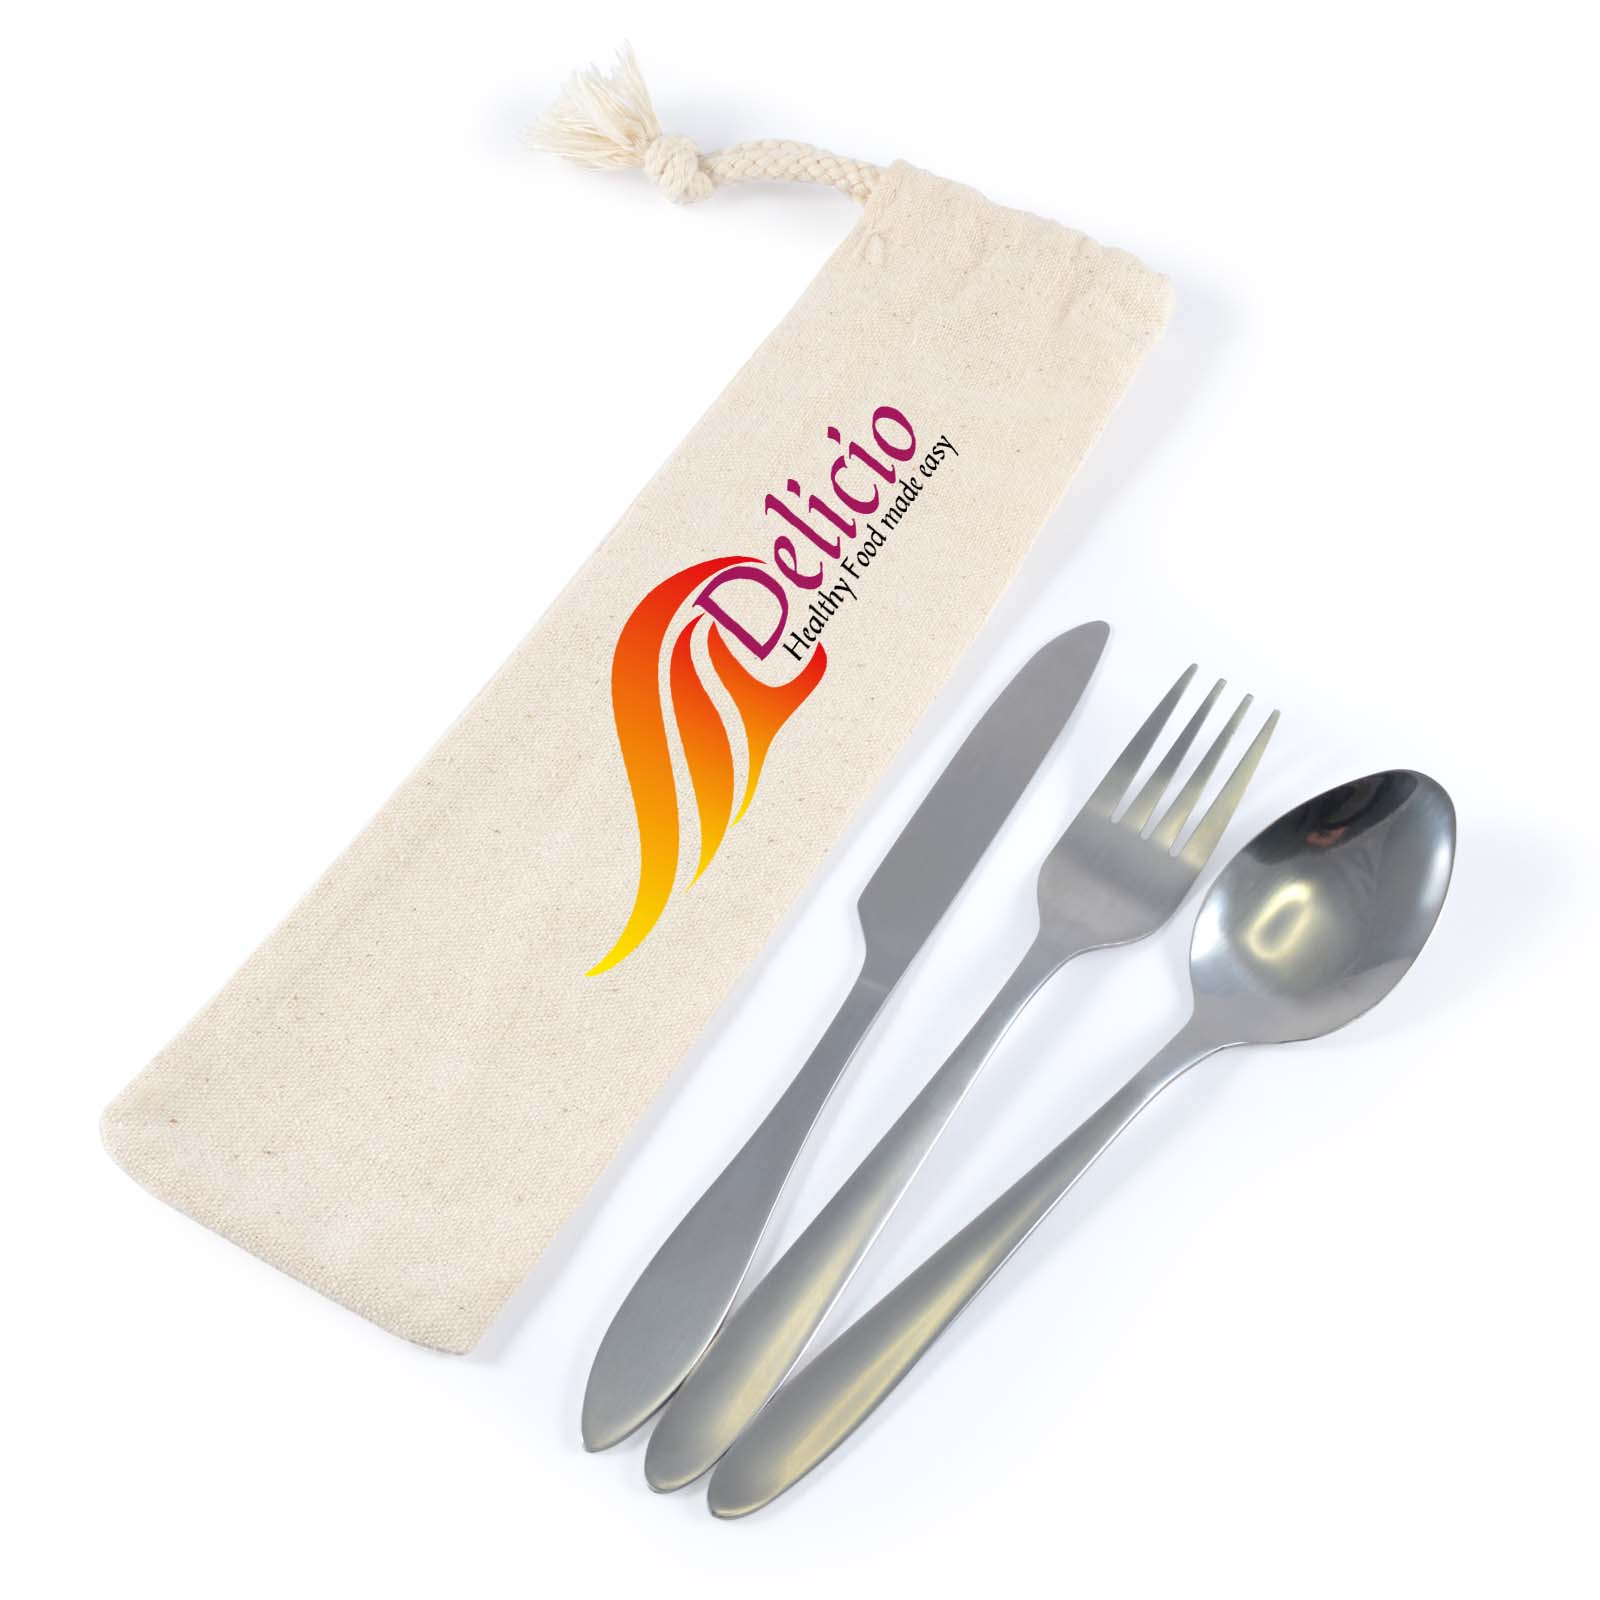 LL8798 - Banquet Cutlery Set in Calico Pouch